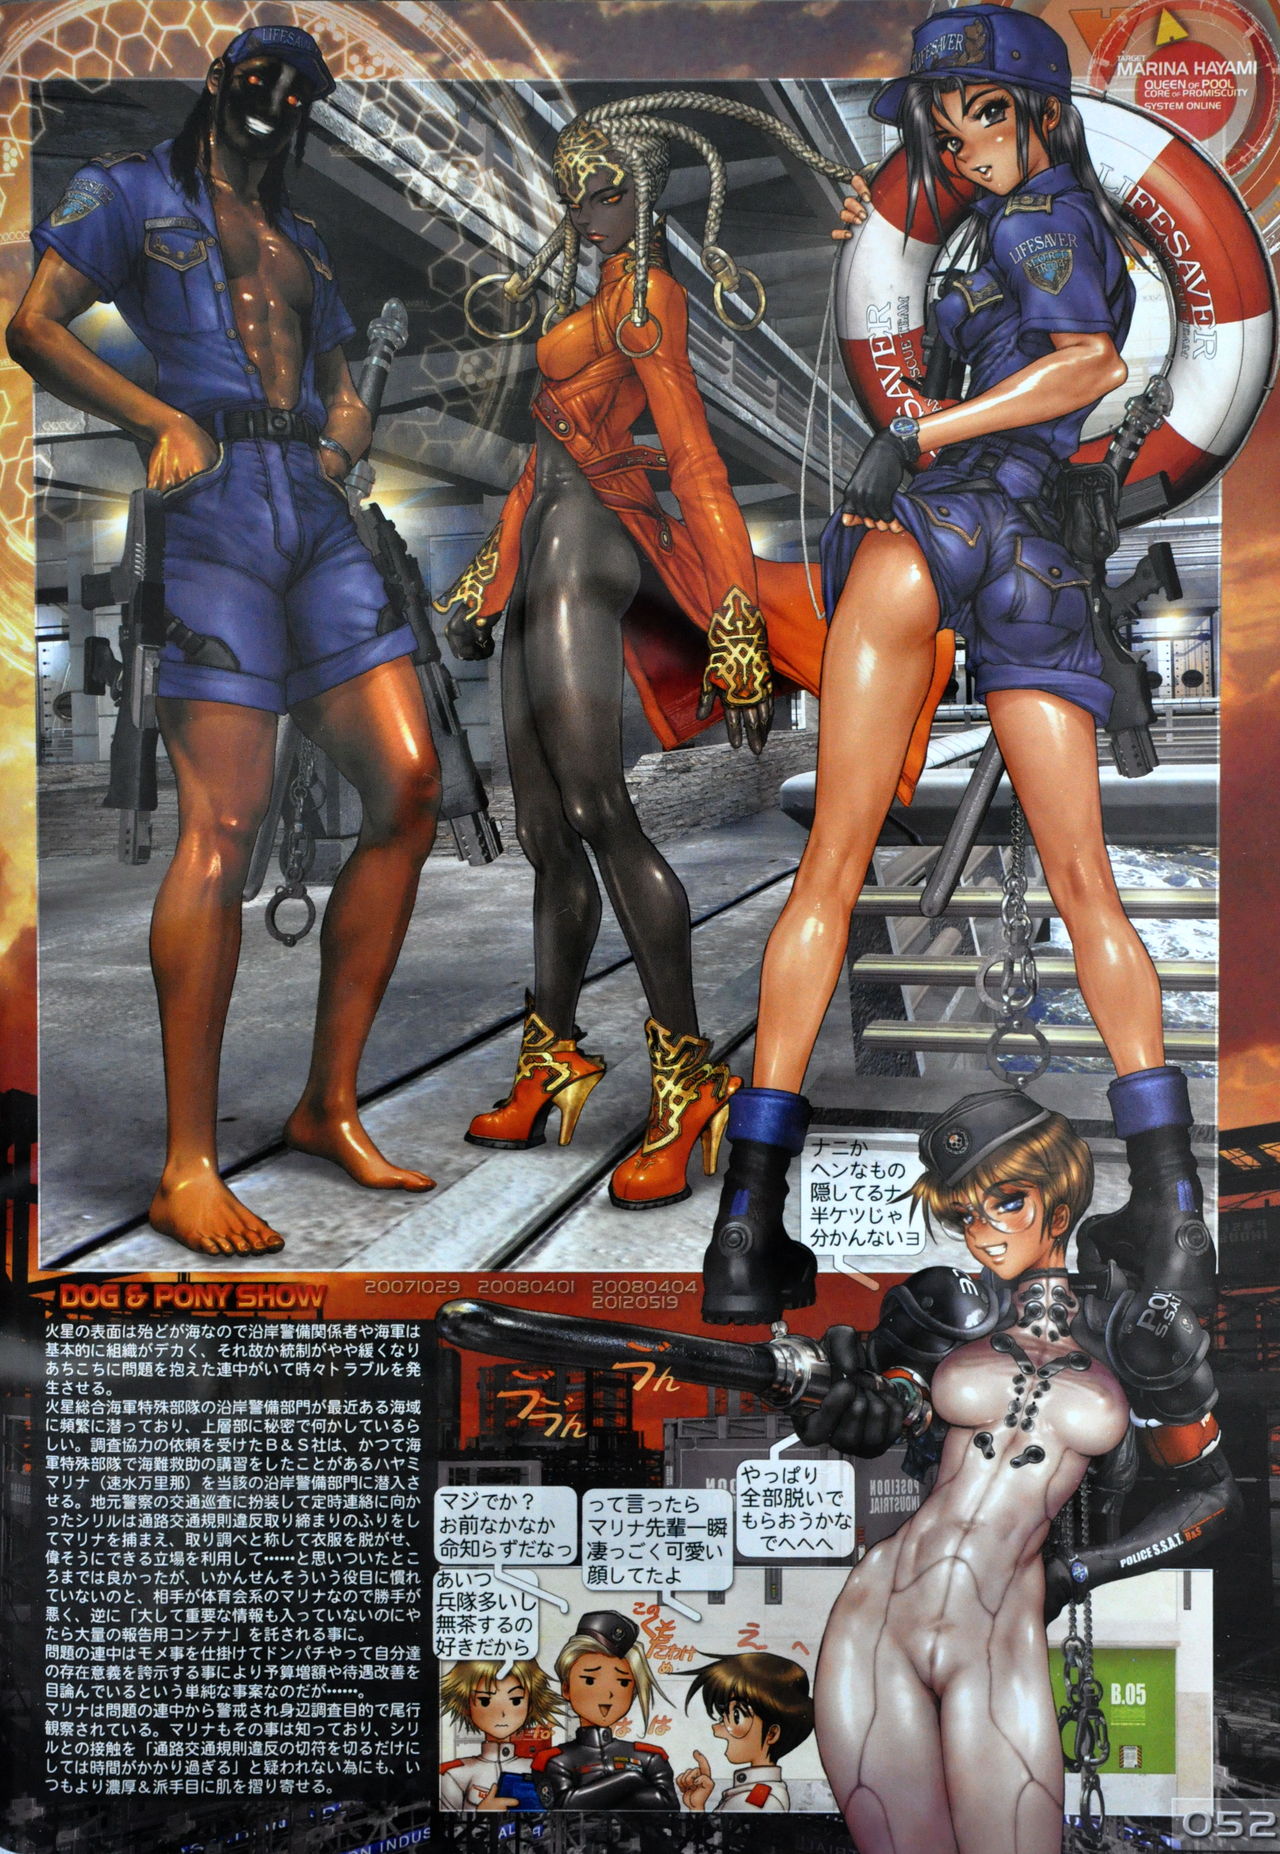 [Masamune Shirow] W-Tails Cat 2 [士郎正宗] W・TAILS CAT 2